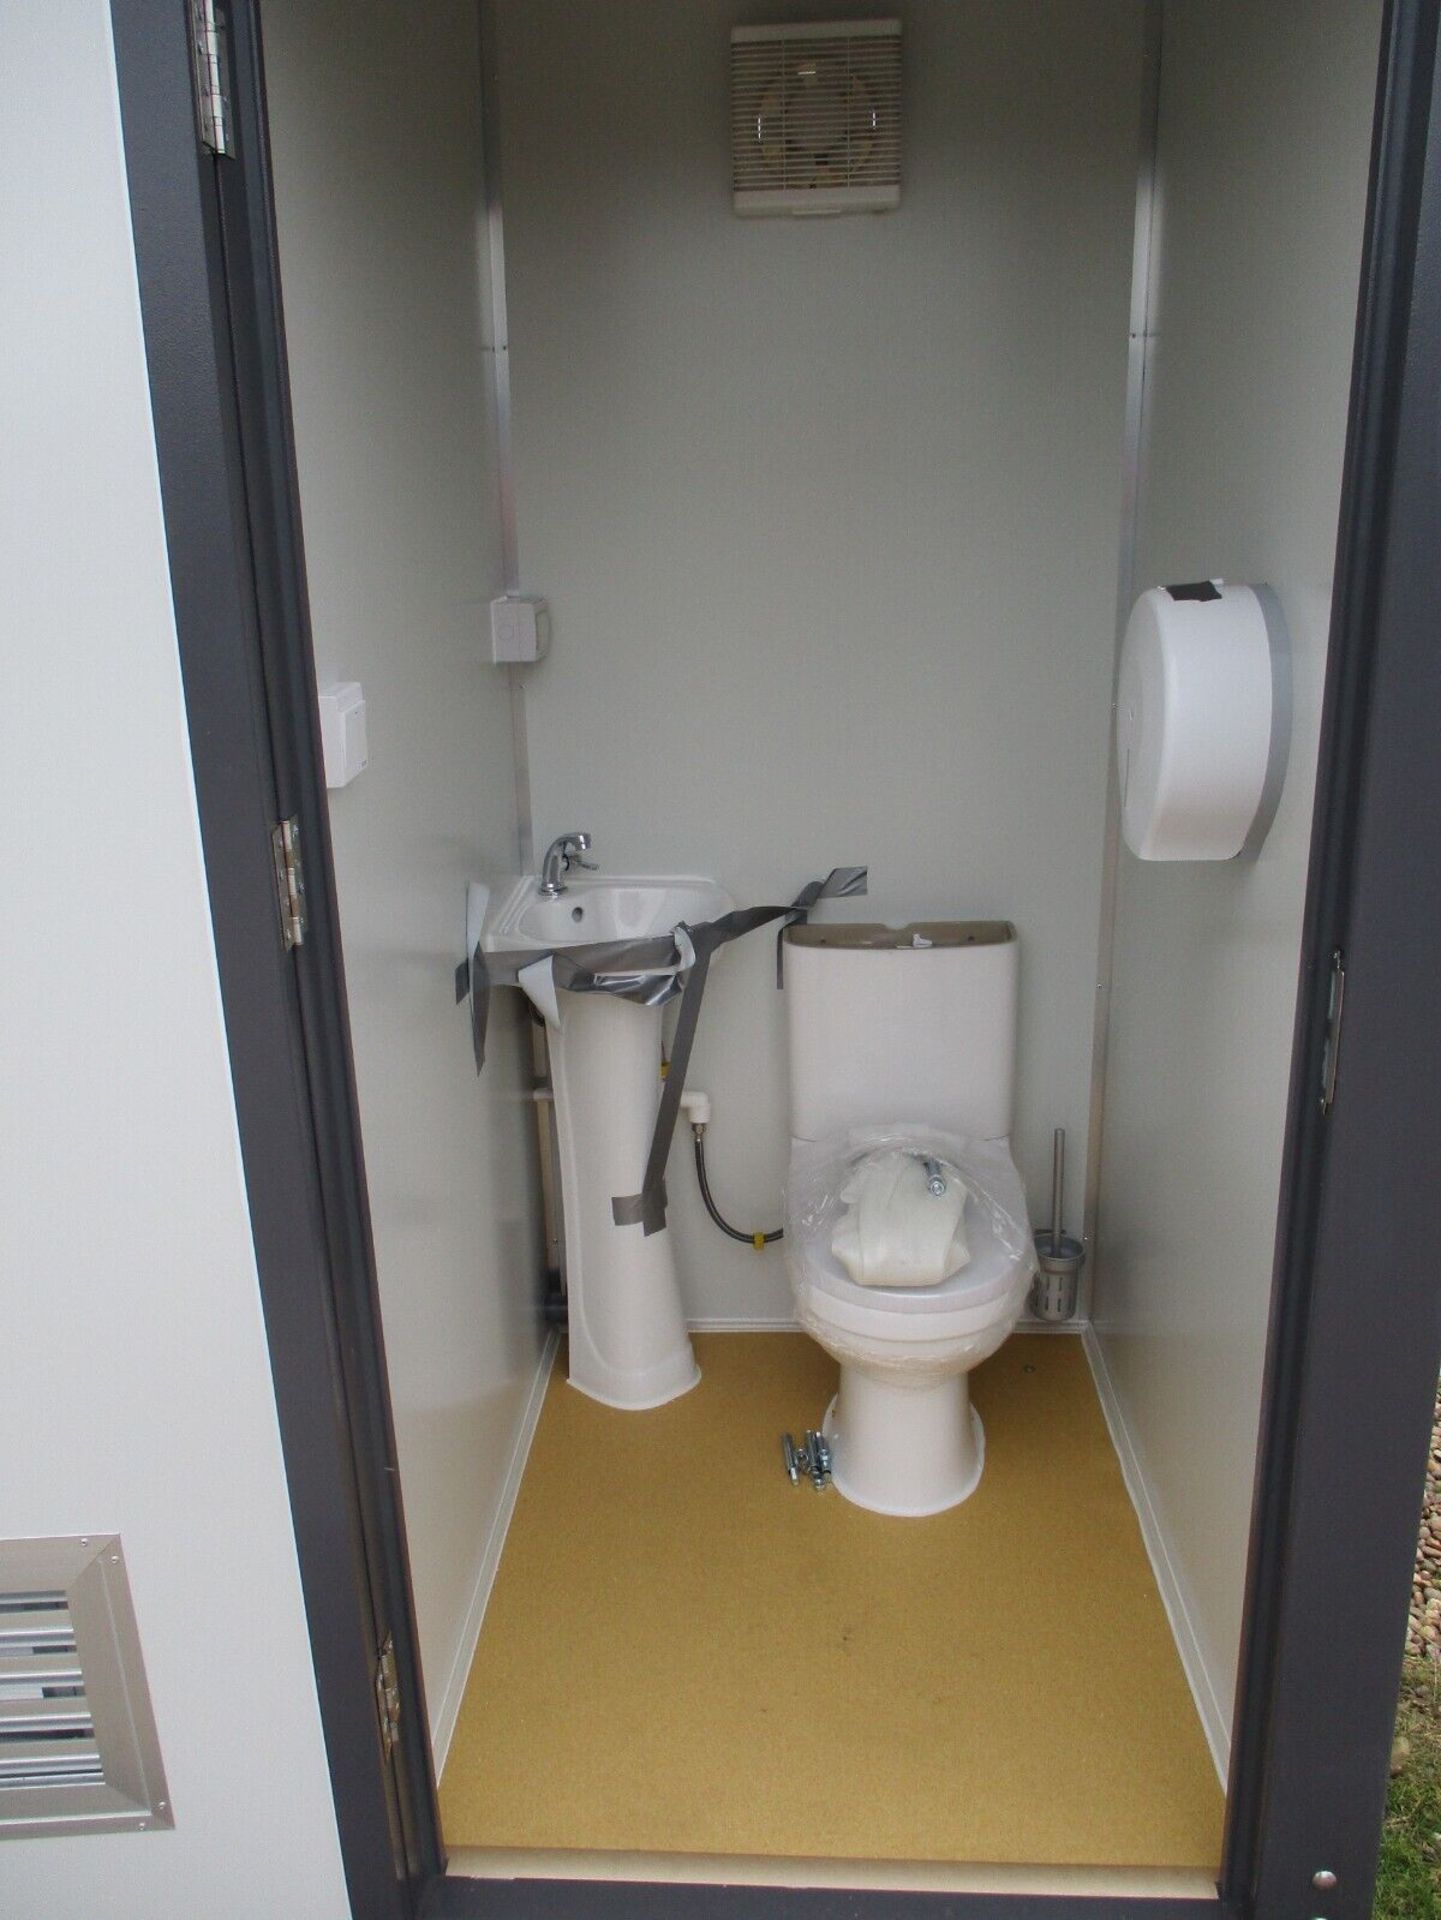 2.15M X 1.3M DOUBLE TOILET BLOCK SECURE SHIPPING CONTAINER DELIVERY ARRANGED - Image 8 of 9